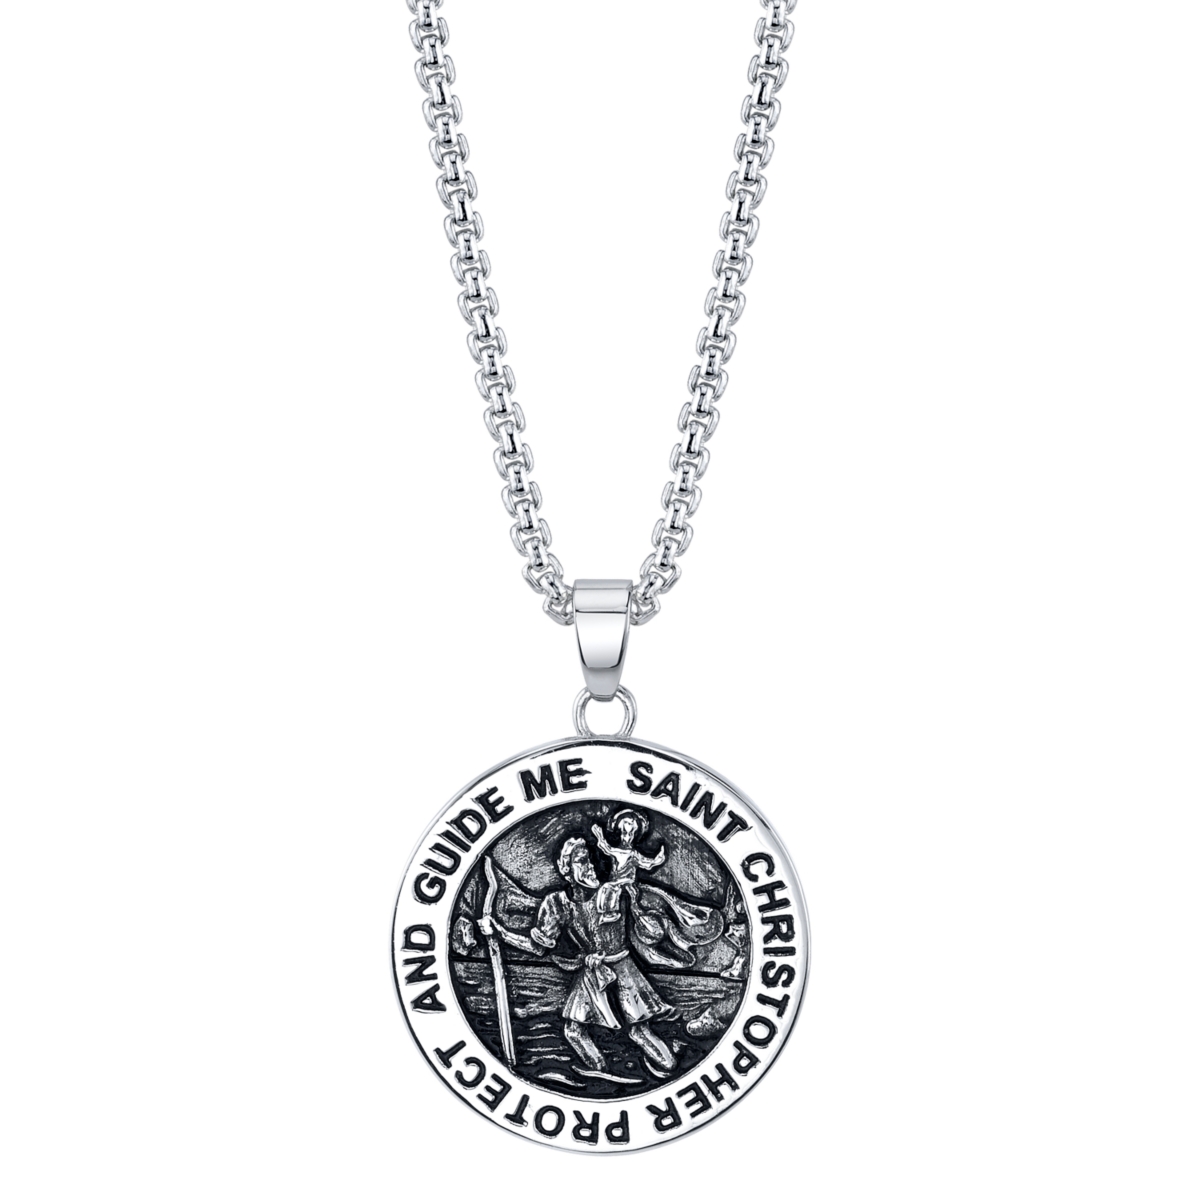 "Saint Christopher" Coin Pendant Necklace in Stainless Steel, 24" Chain - Stainless Steel